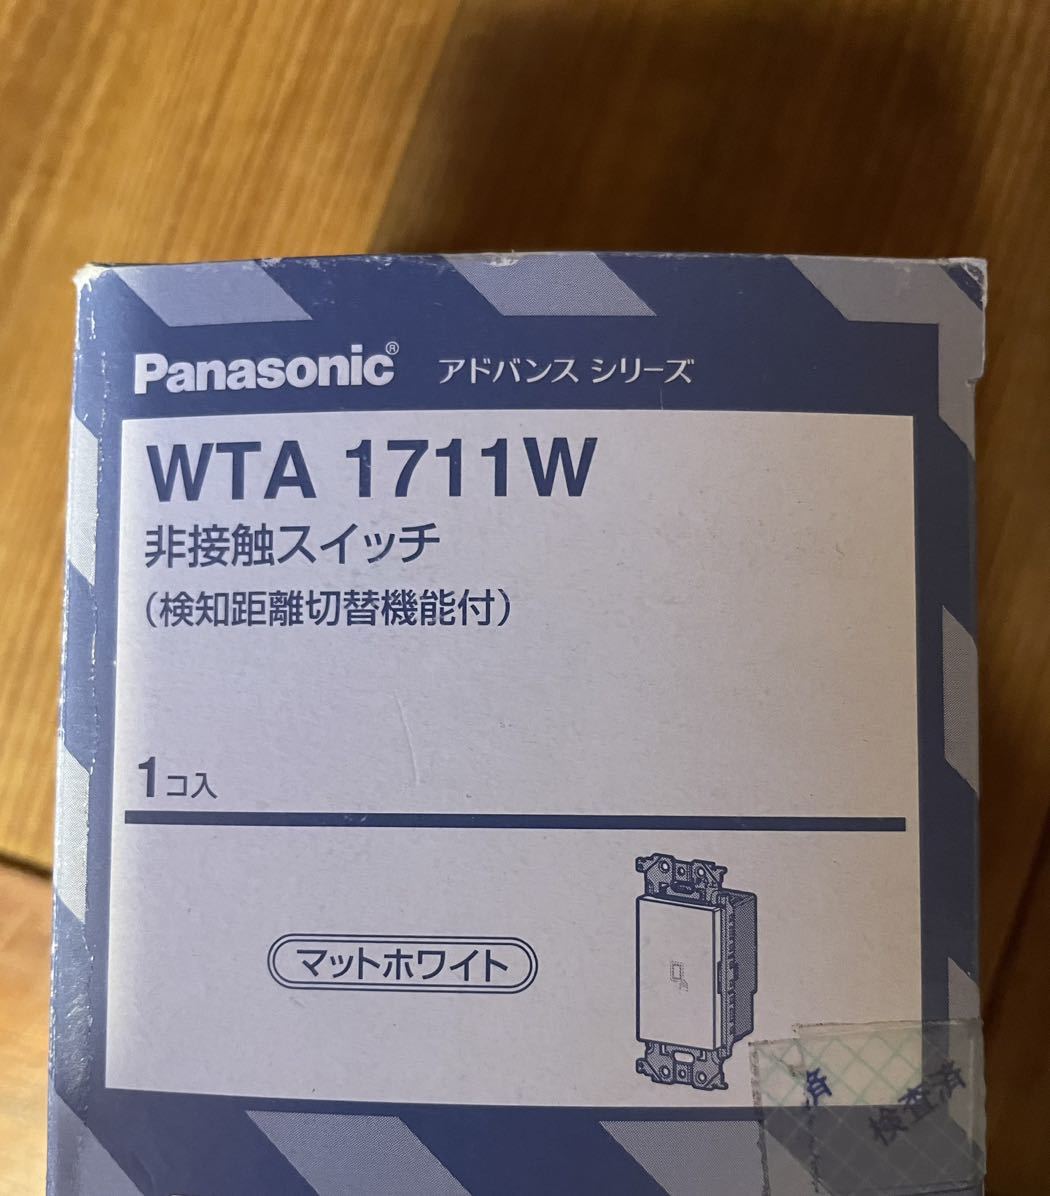 WTA1711W advance series non contact switch Panasonic Panasonic ( detection distance switch with function ) mat white 